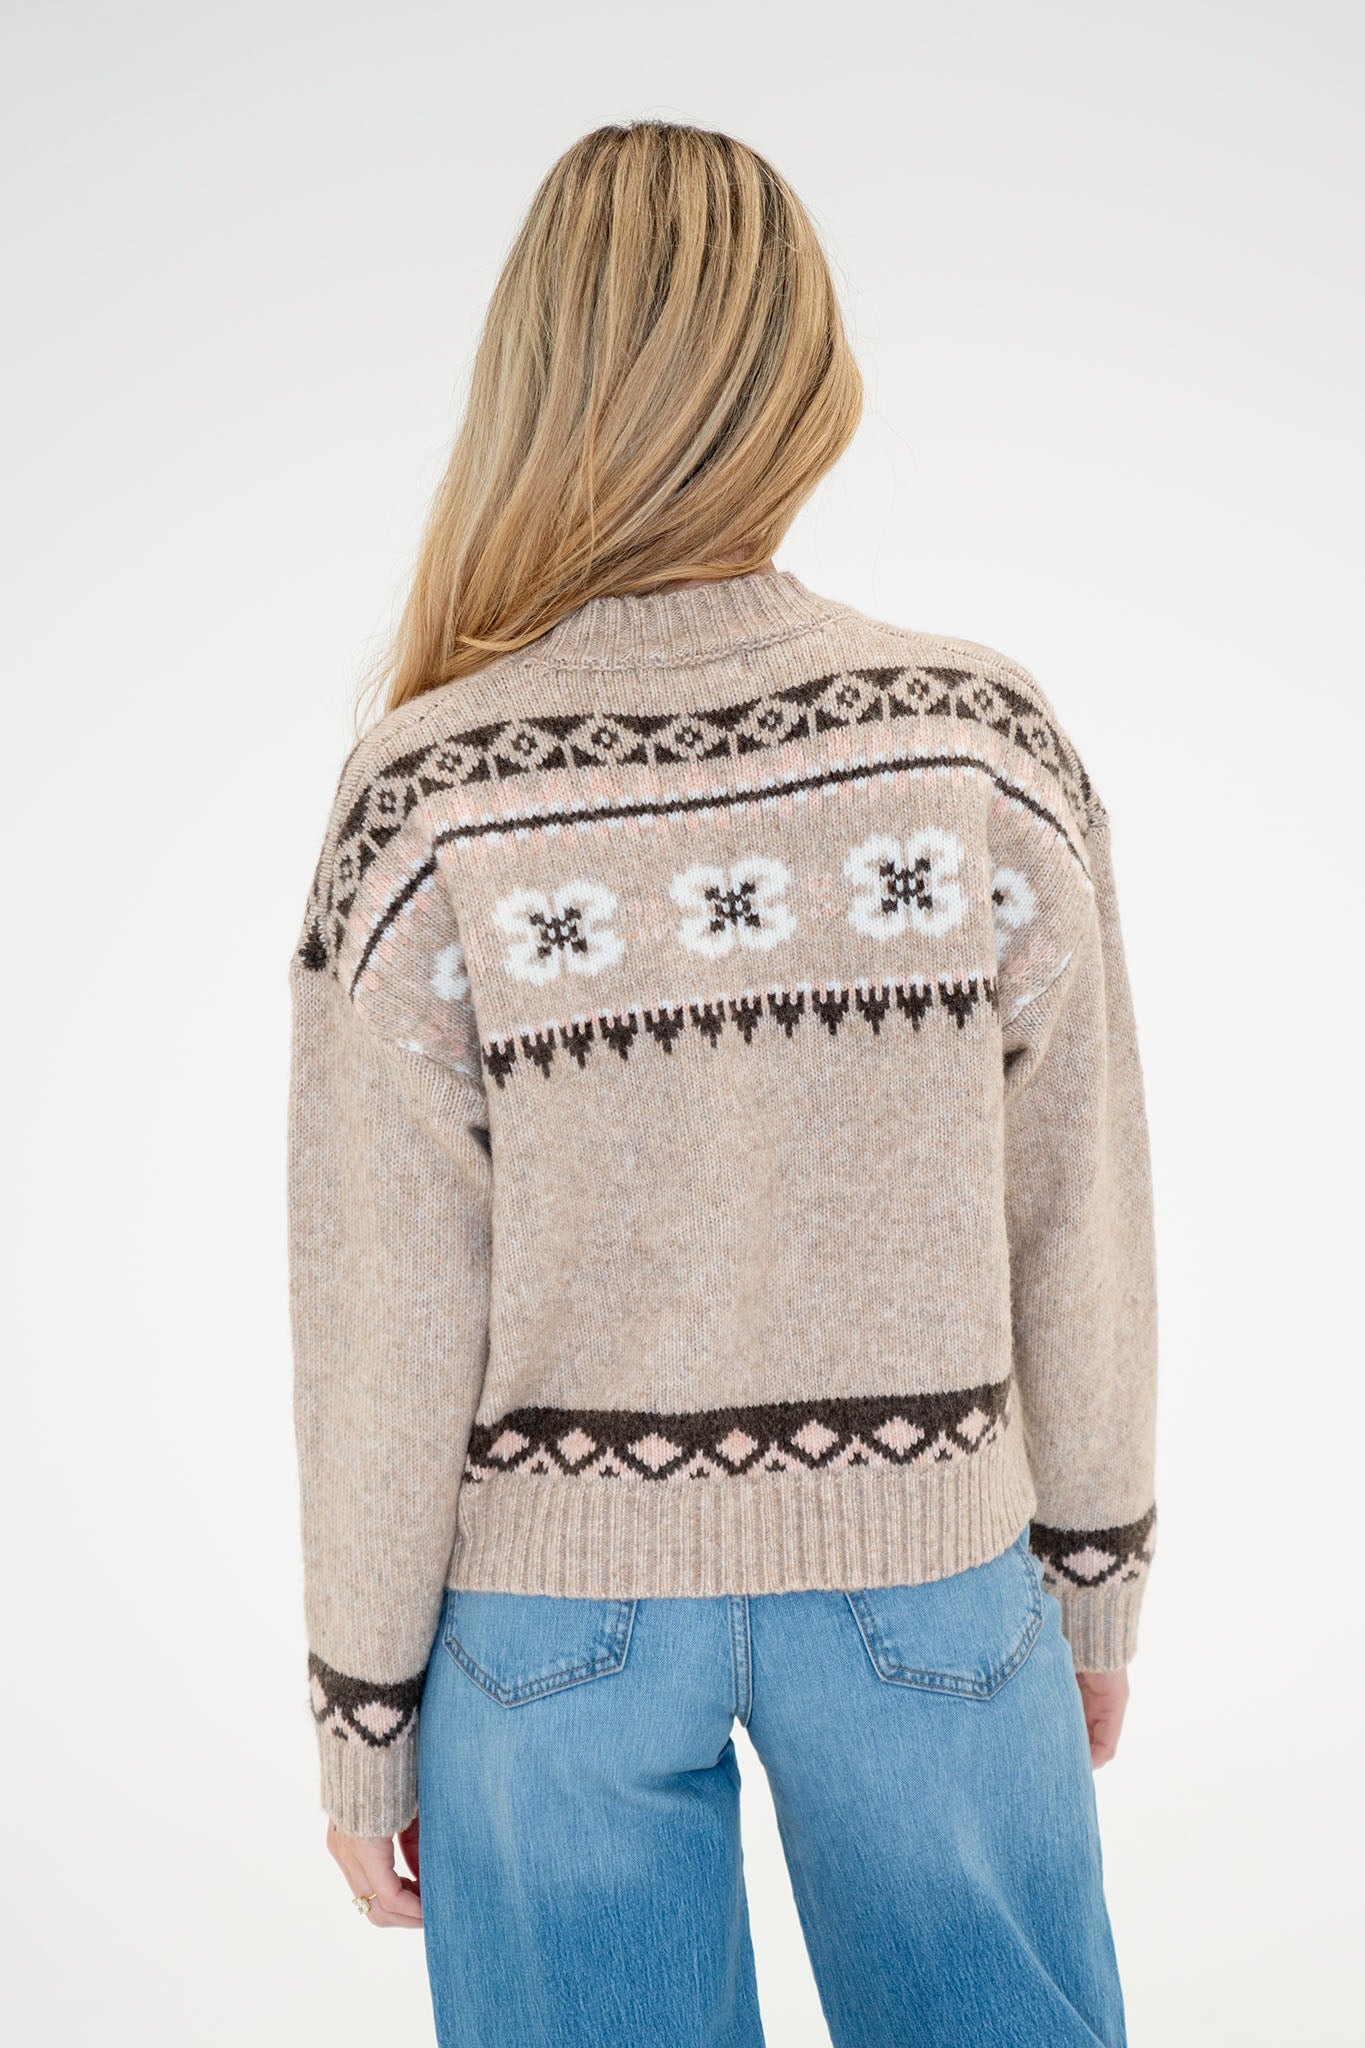 View 4 of Moonshine Fair Aisle Crewneck Sweater, a Sweaters from Larrea Cove. Detail: .